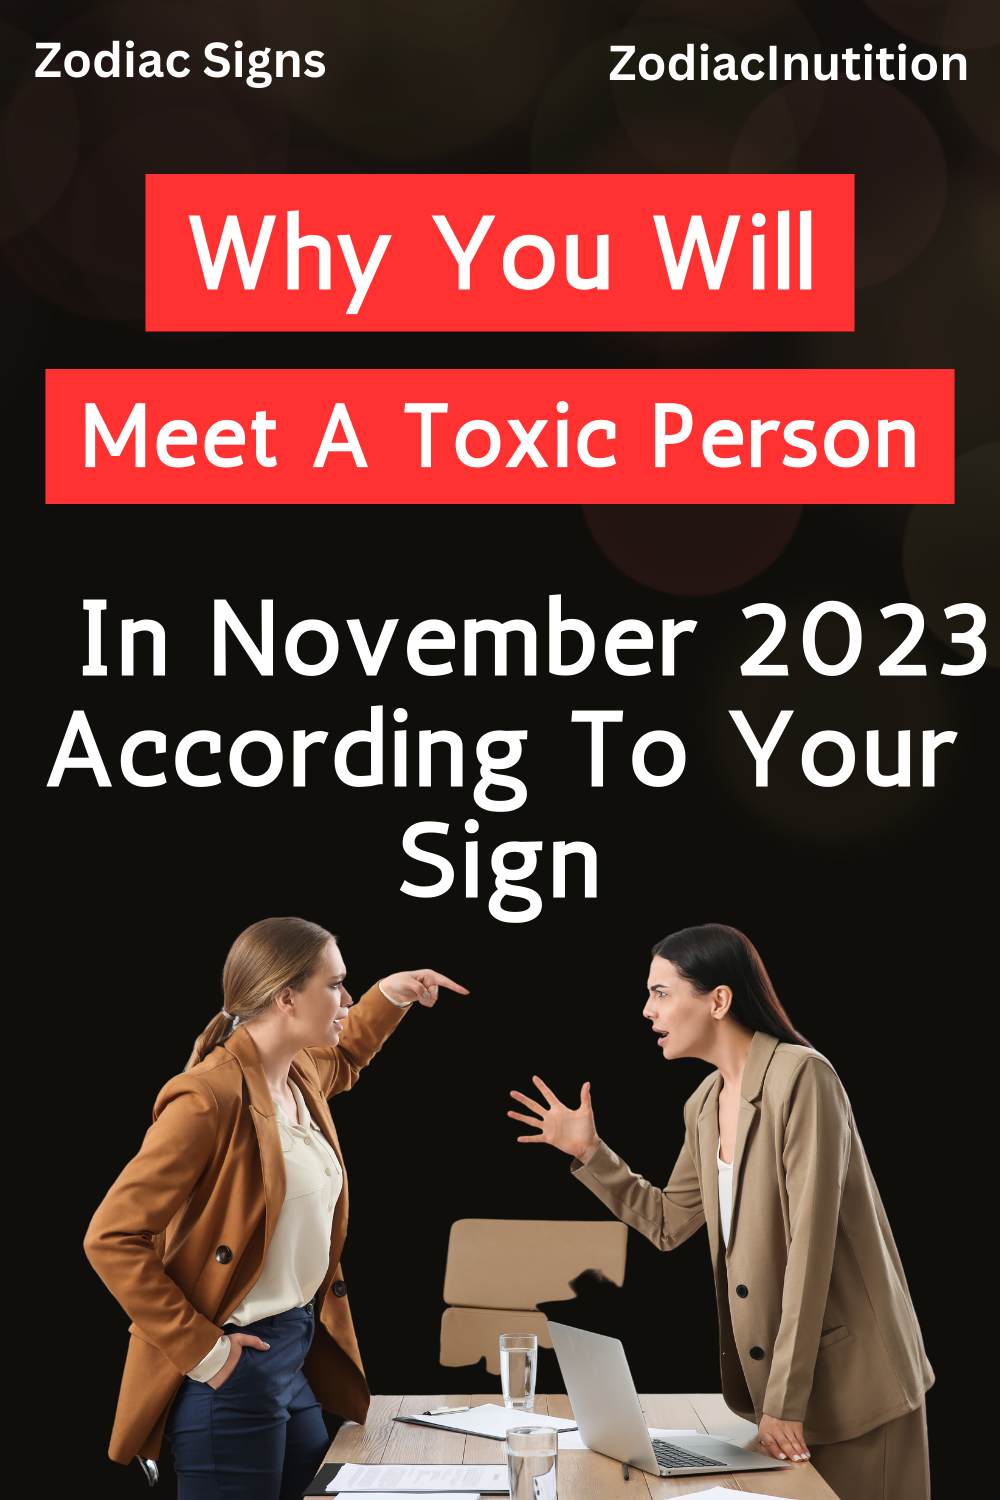 Why You Will Meet A Toxic Person In November 2023 According To Your Sign